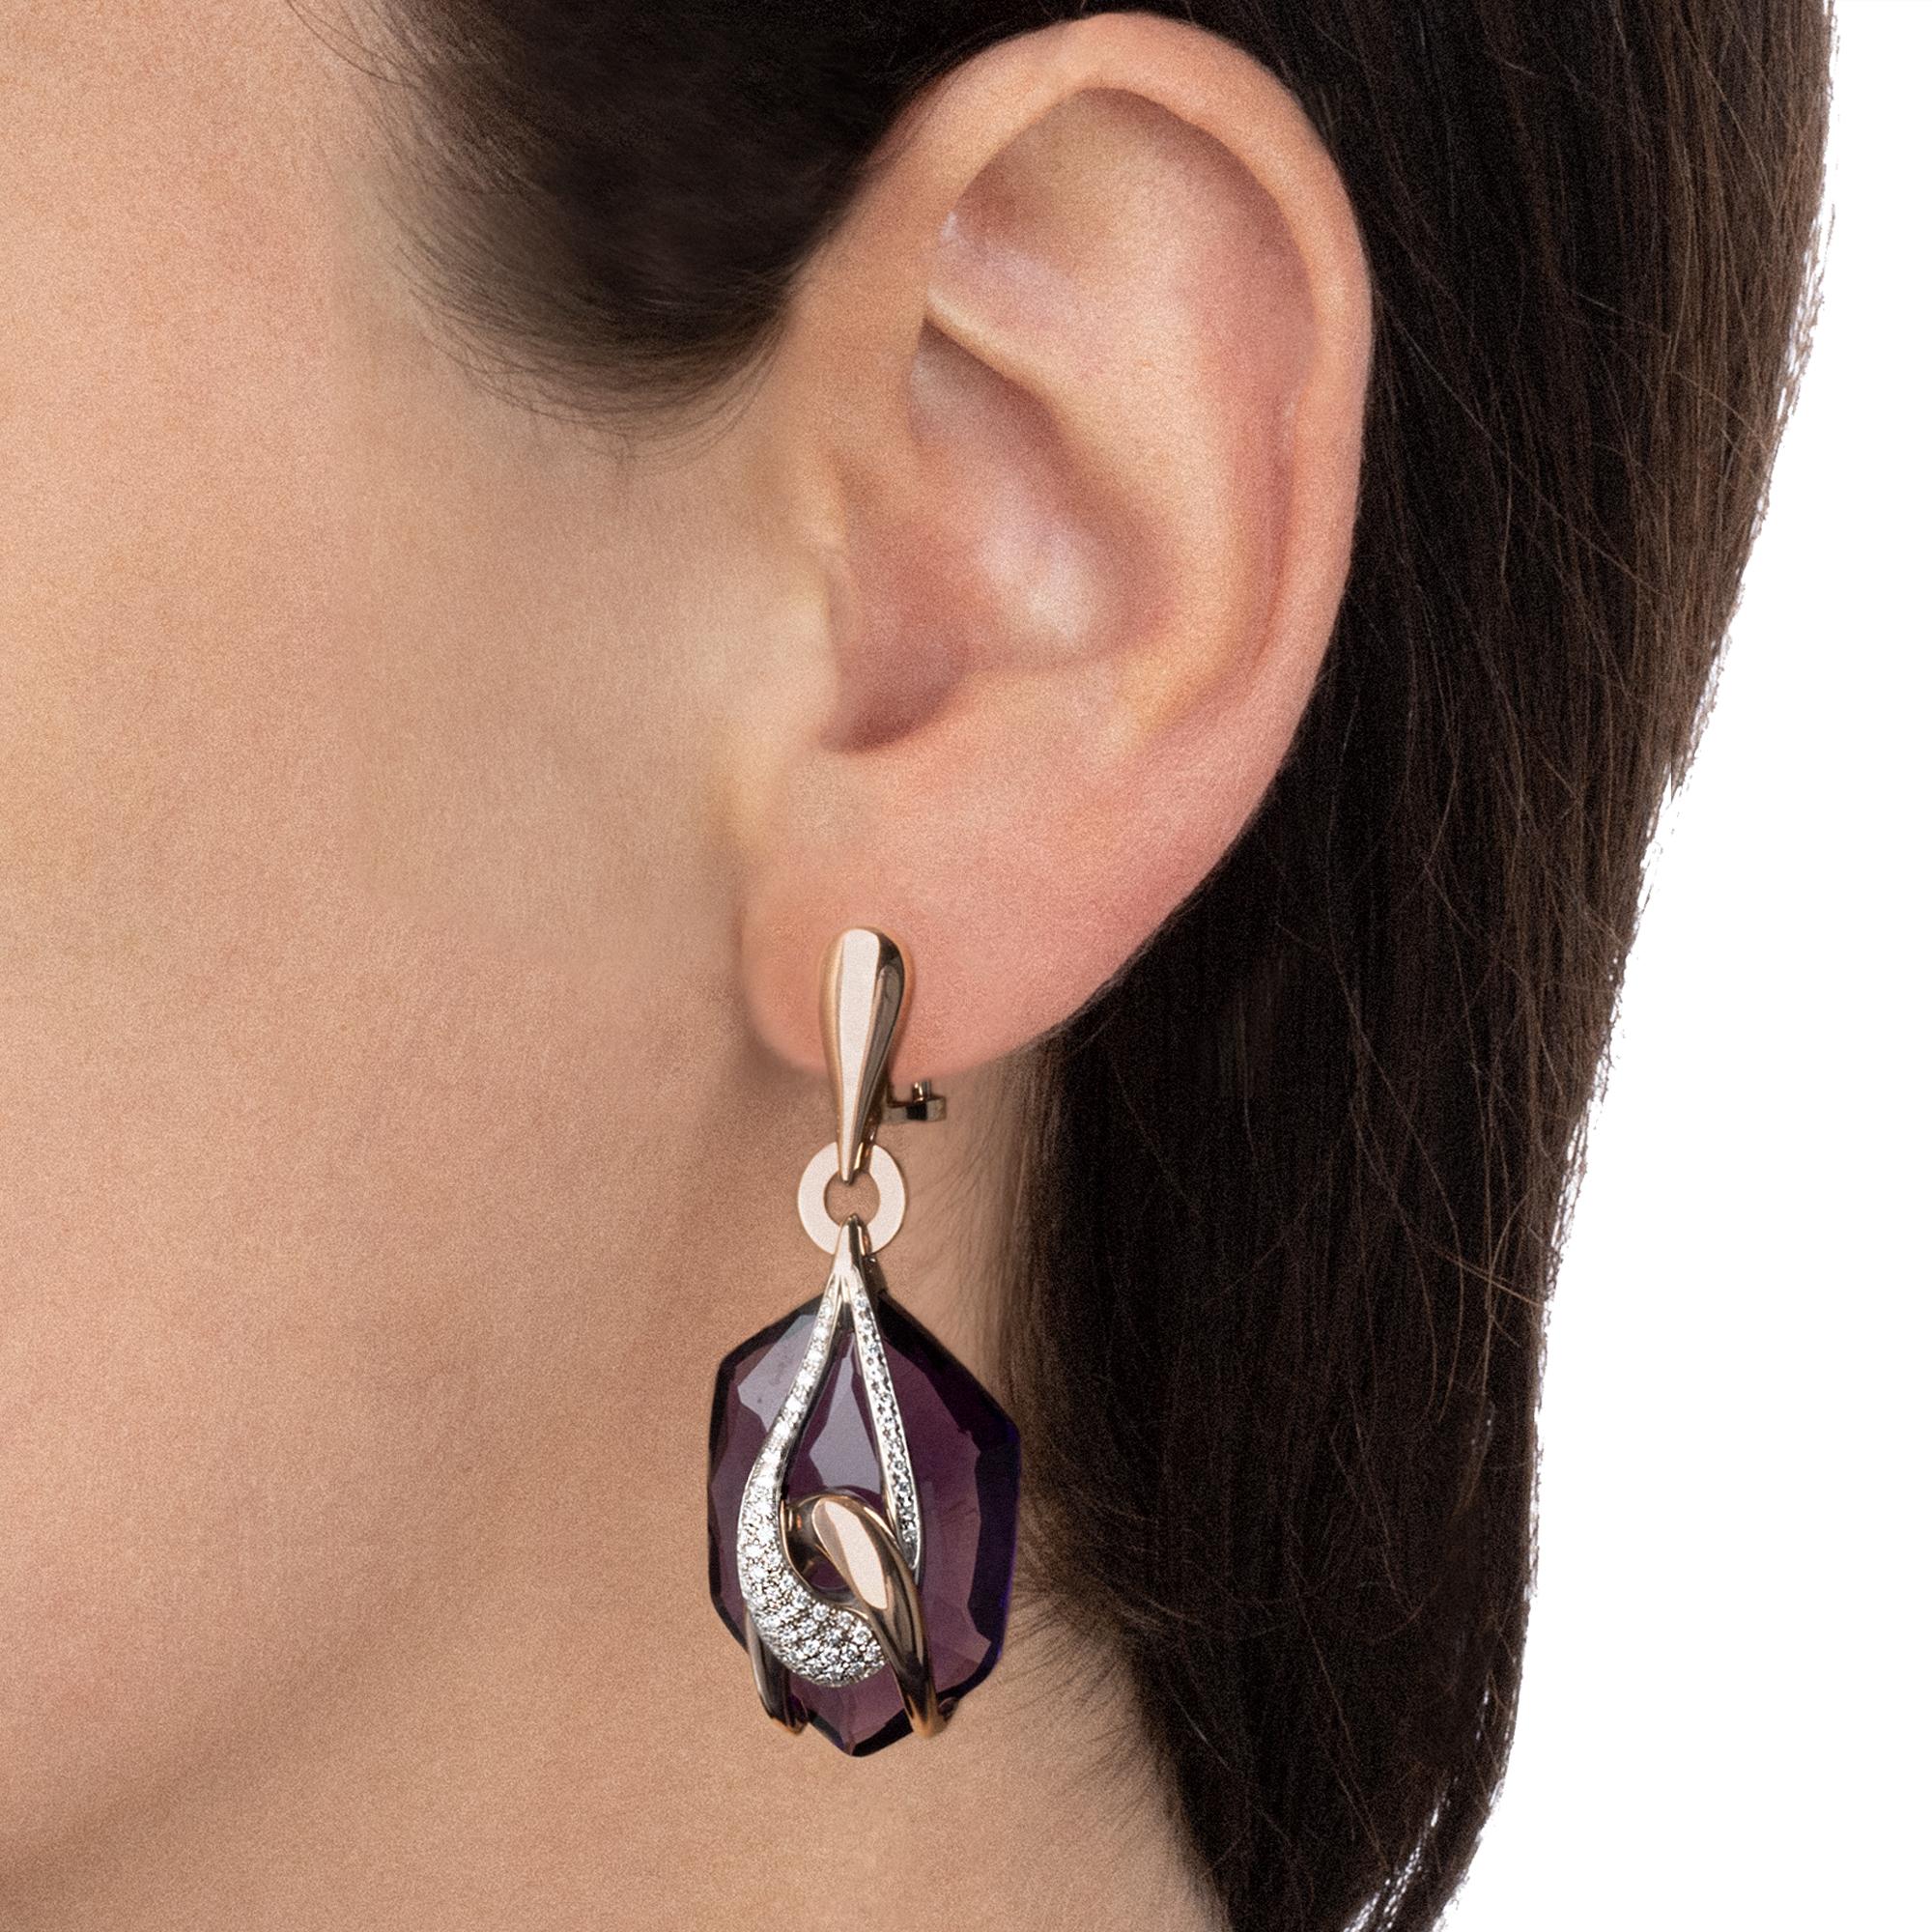 The original and captivating design of these dangle earrings won’t certainly go unnoticed. The evocative charm of the central amethyst blends with the innovative design of the intertwined decoration in white and rose gold. The warm tone of the pink